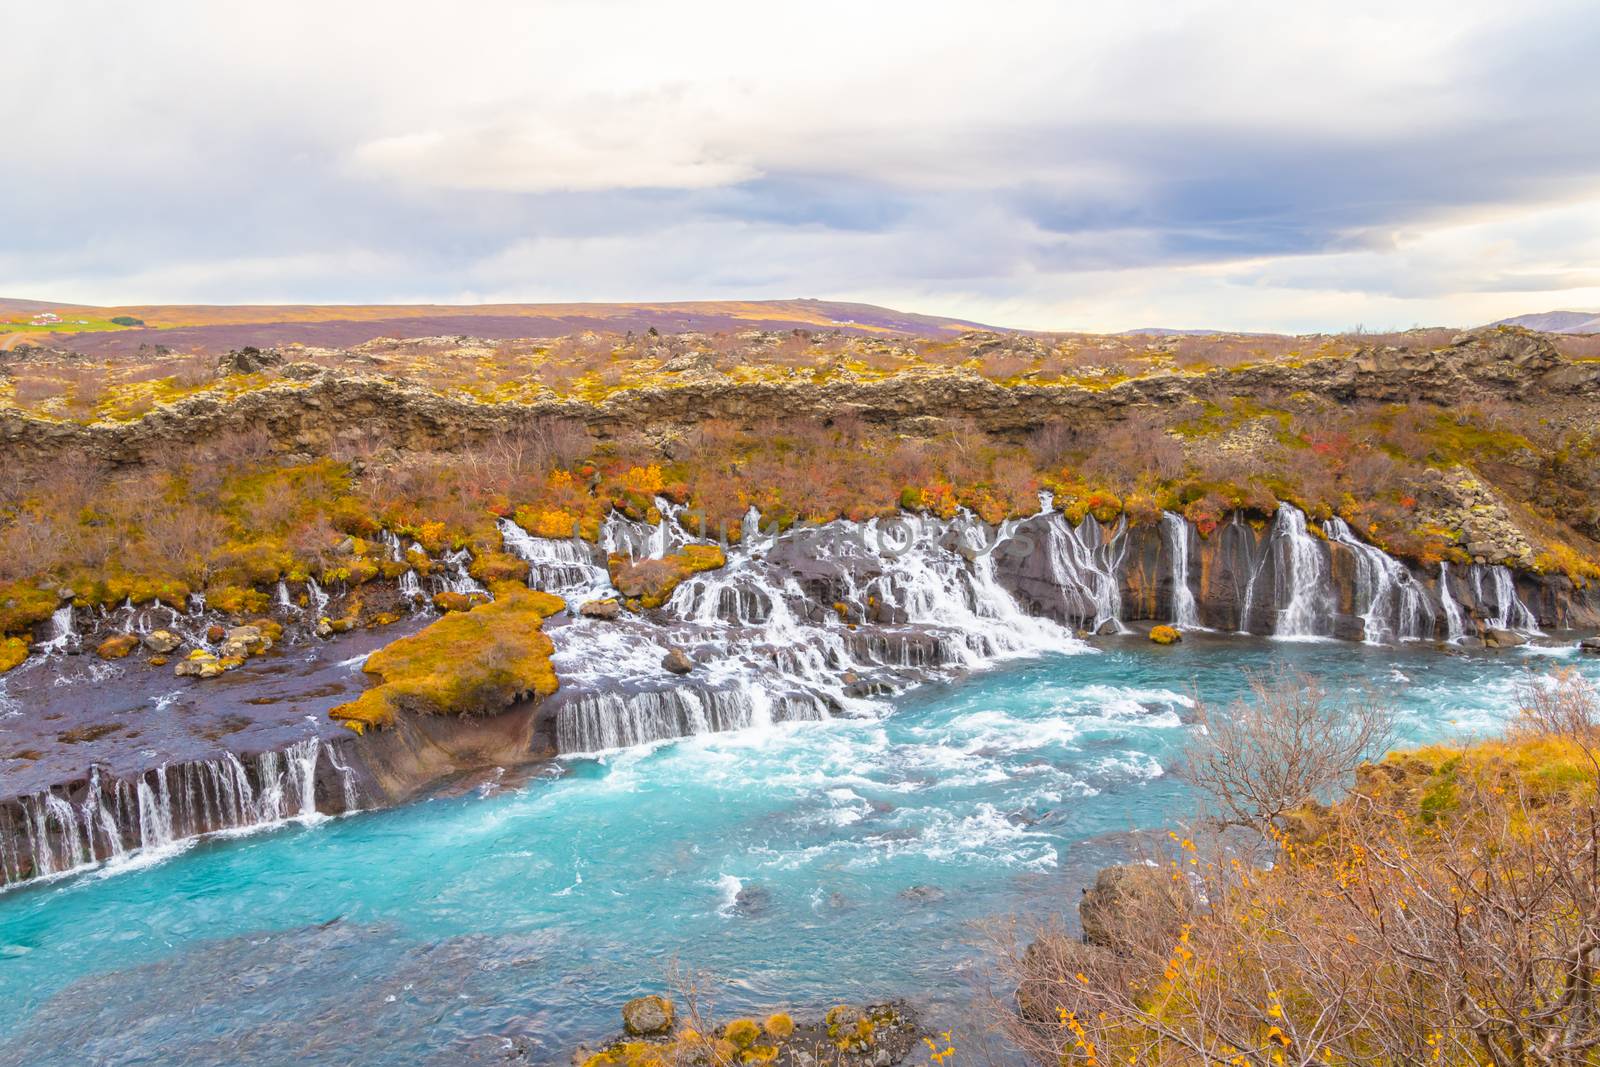 Hraunfossar series of waterfalls barnafoss turquoise water collecting into plunge pool during fall